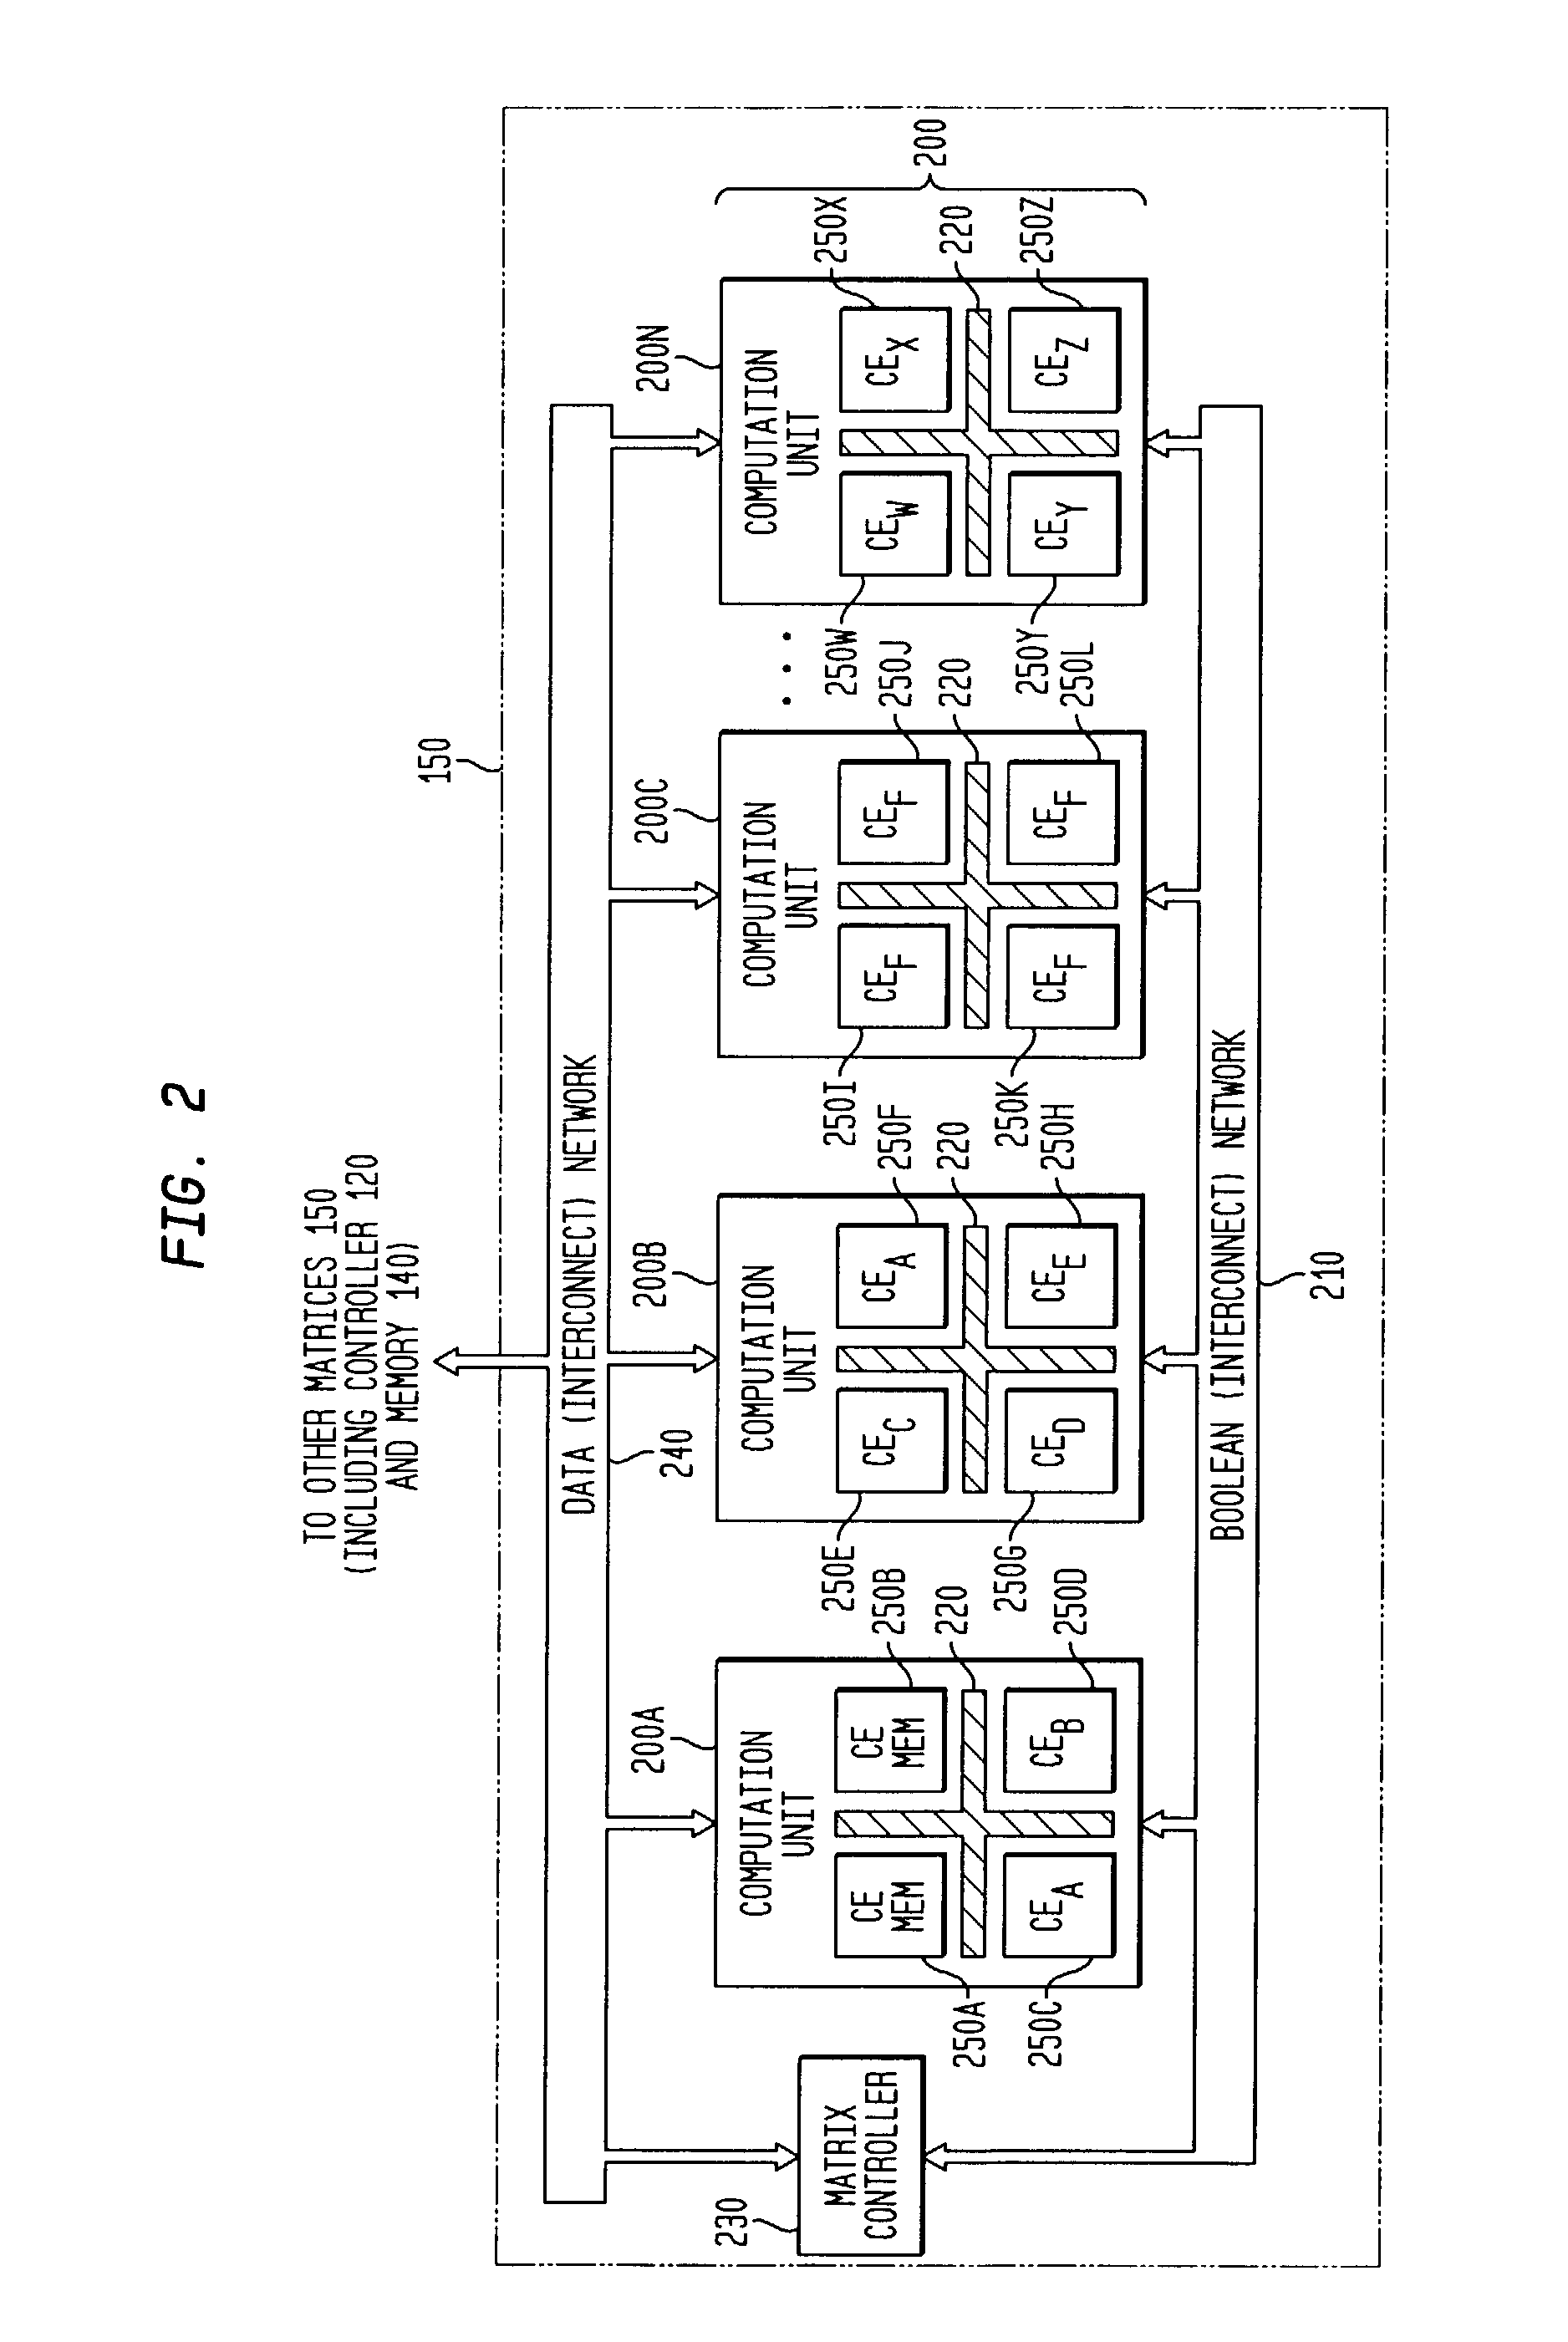 Method, system and program for developing and scheduling adaptive integrated circuity and corresponding control or configuration information